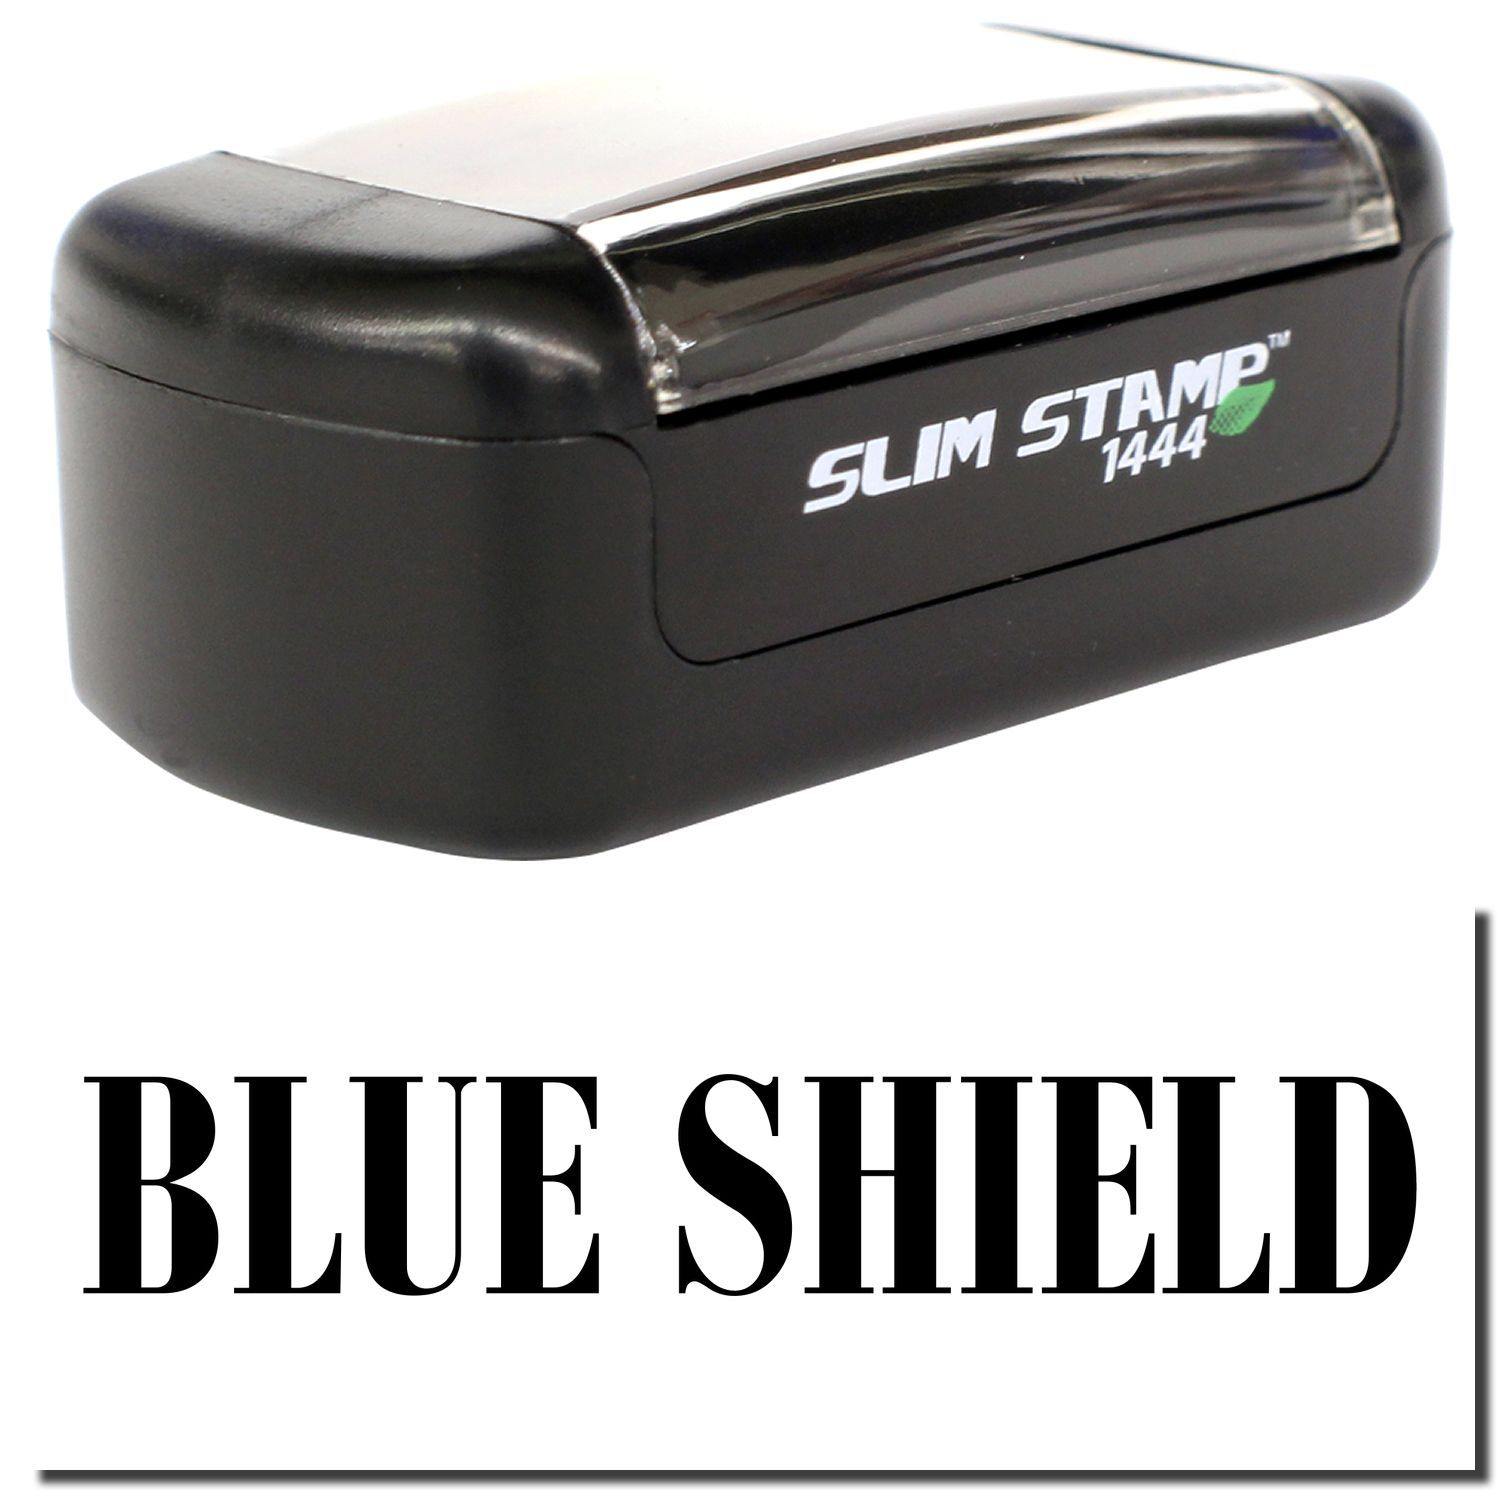 A stock office pre-inked stamp with a stamped image showing how the text "BLUE SHIELD" is displayed after stamping.